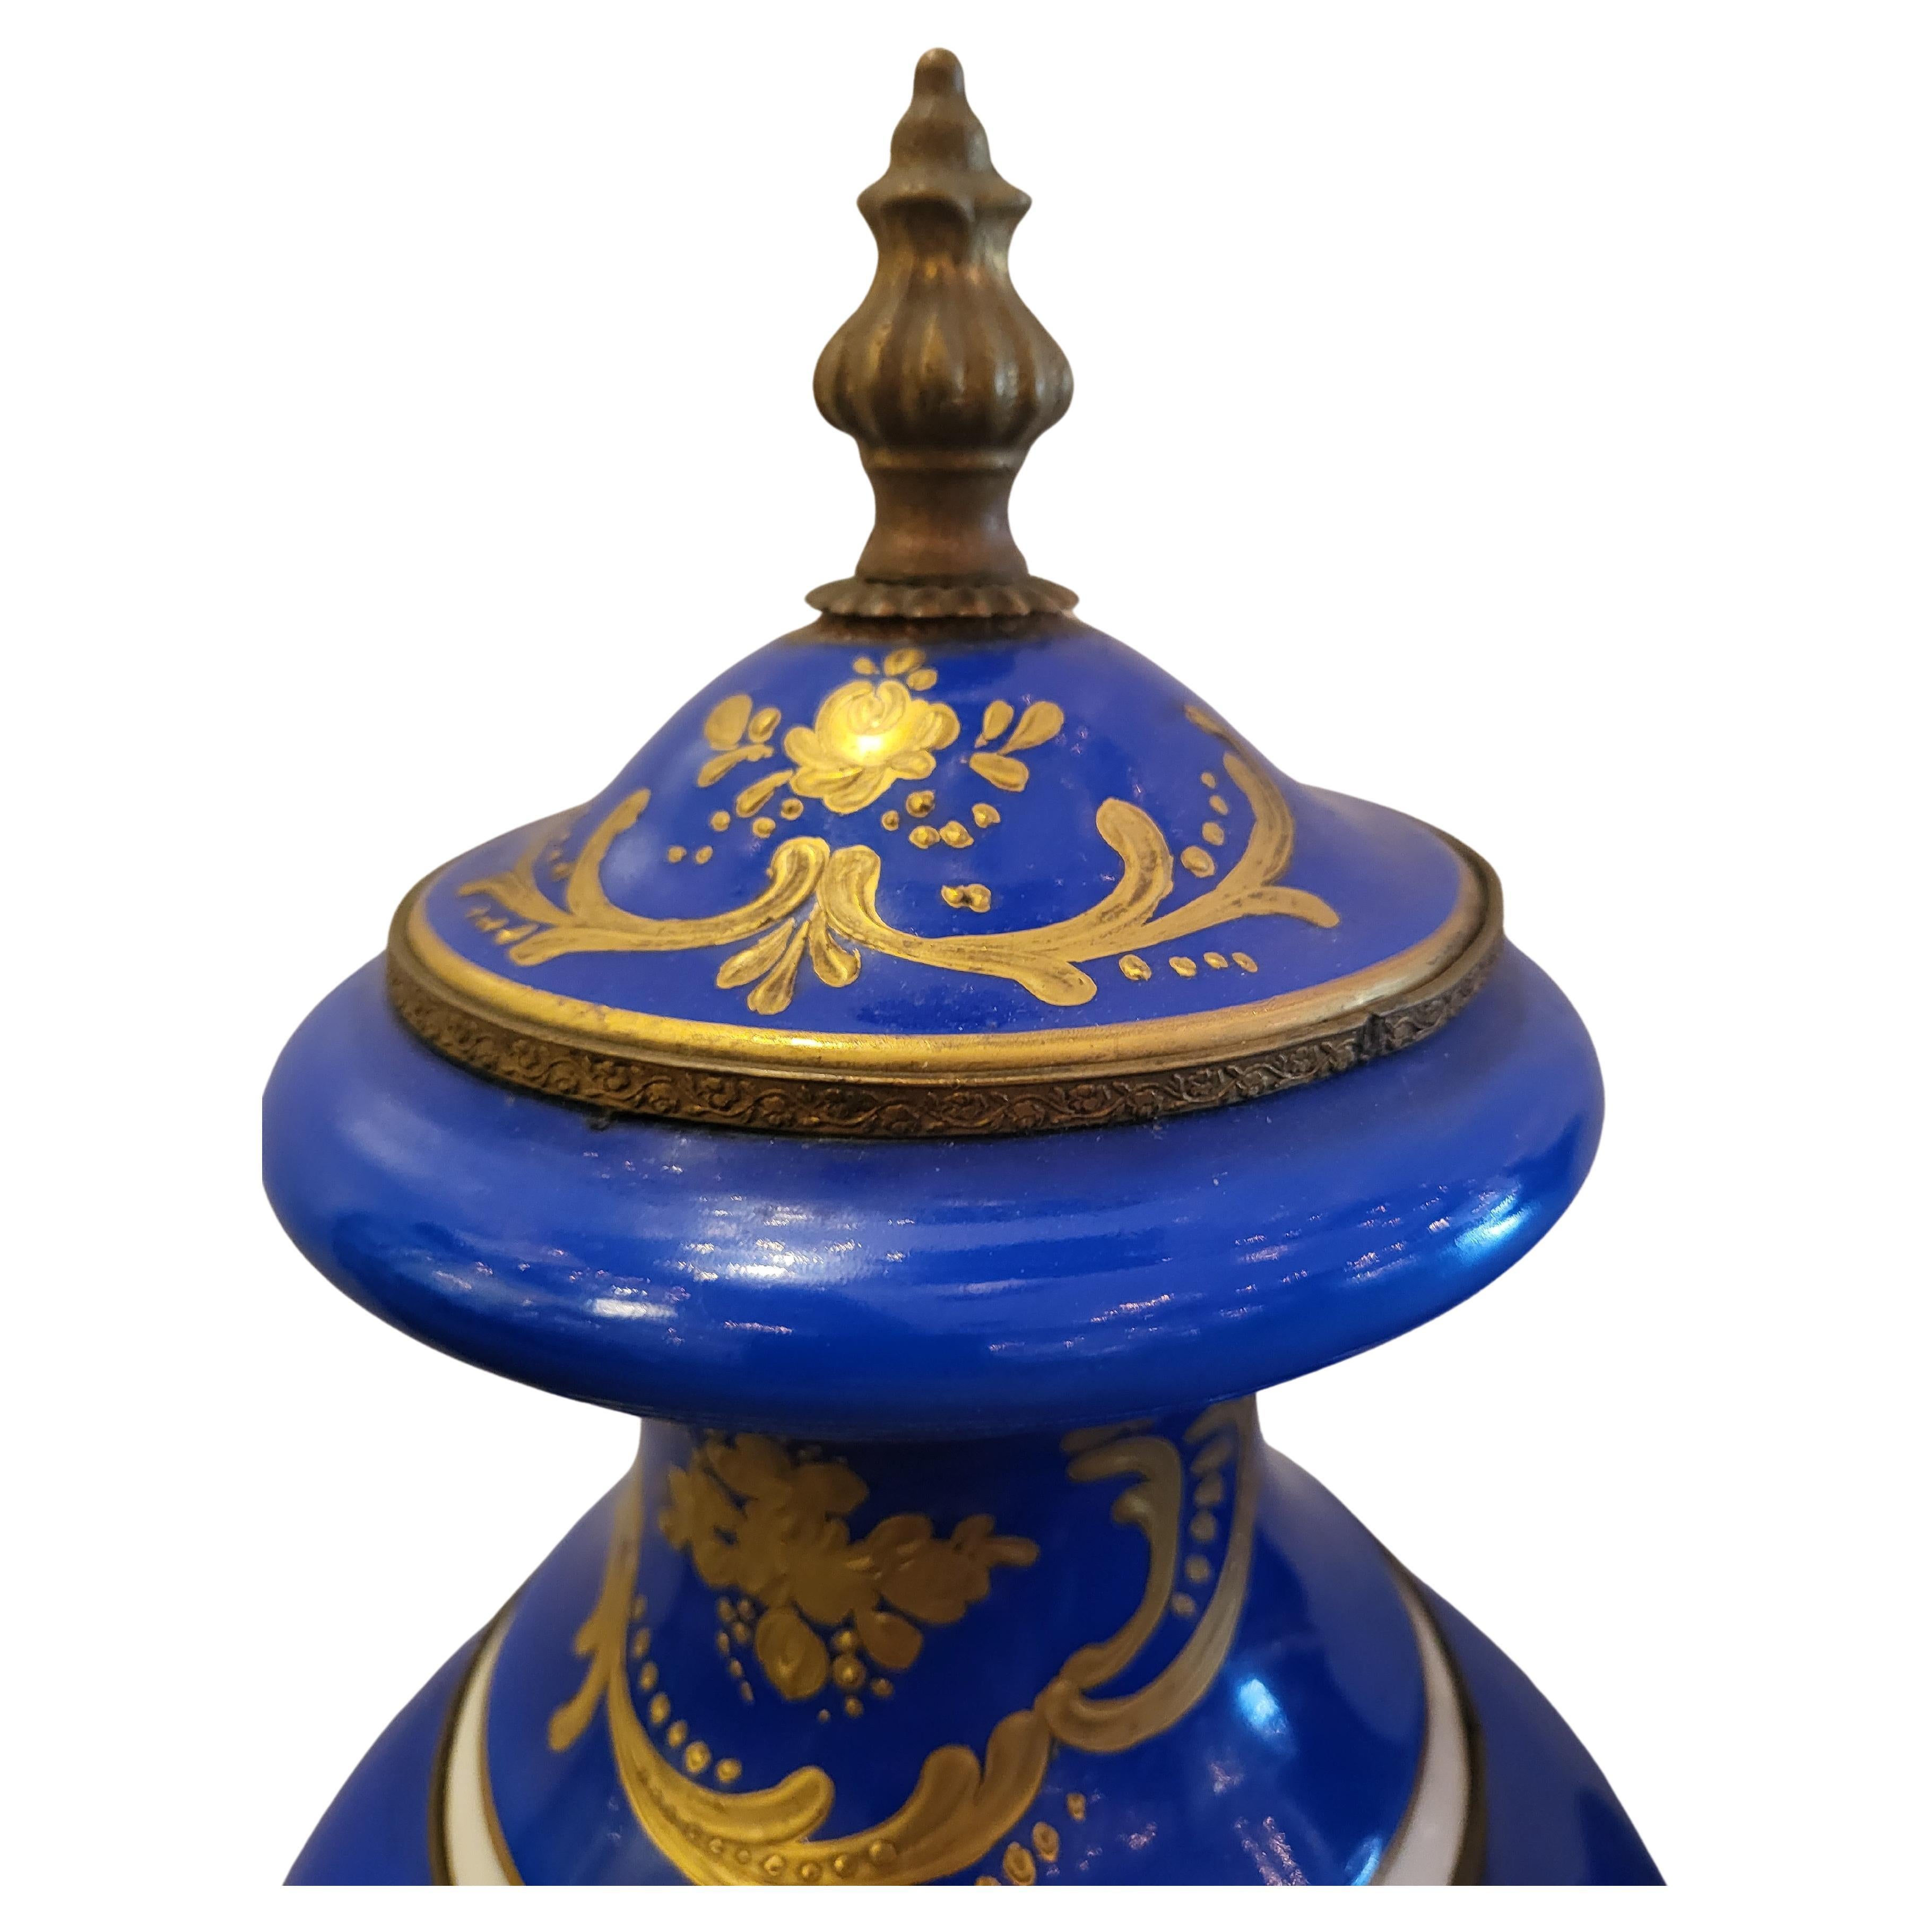 Sevres style porcelain bolted urns, 19th c., royal blue ground, raised gilt enamel, hand-painted reserves with flowers, fluted plinth, rising on gilt metal feet.